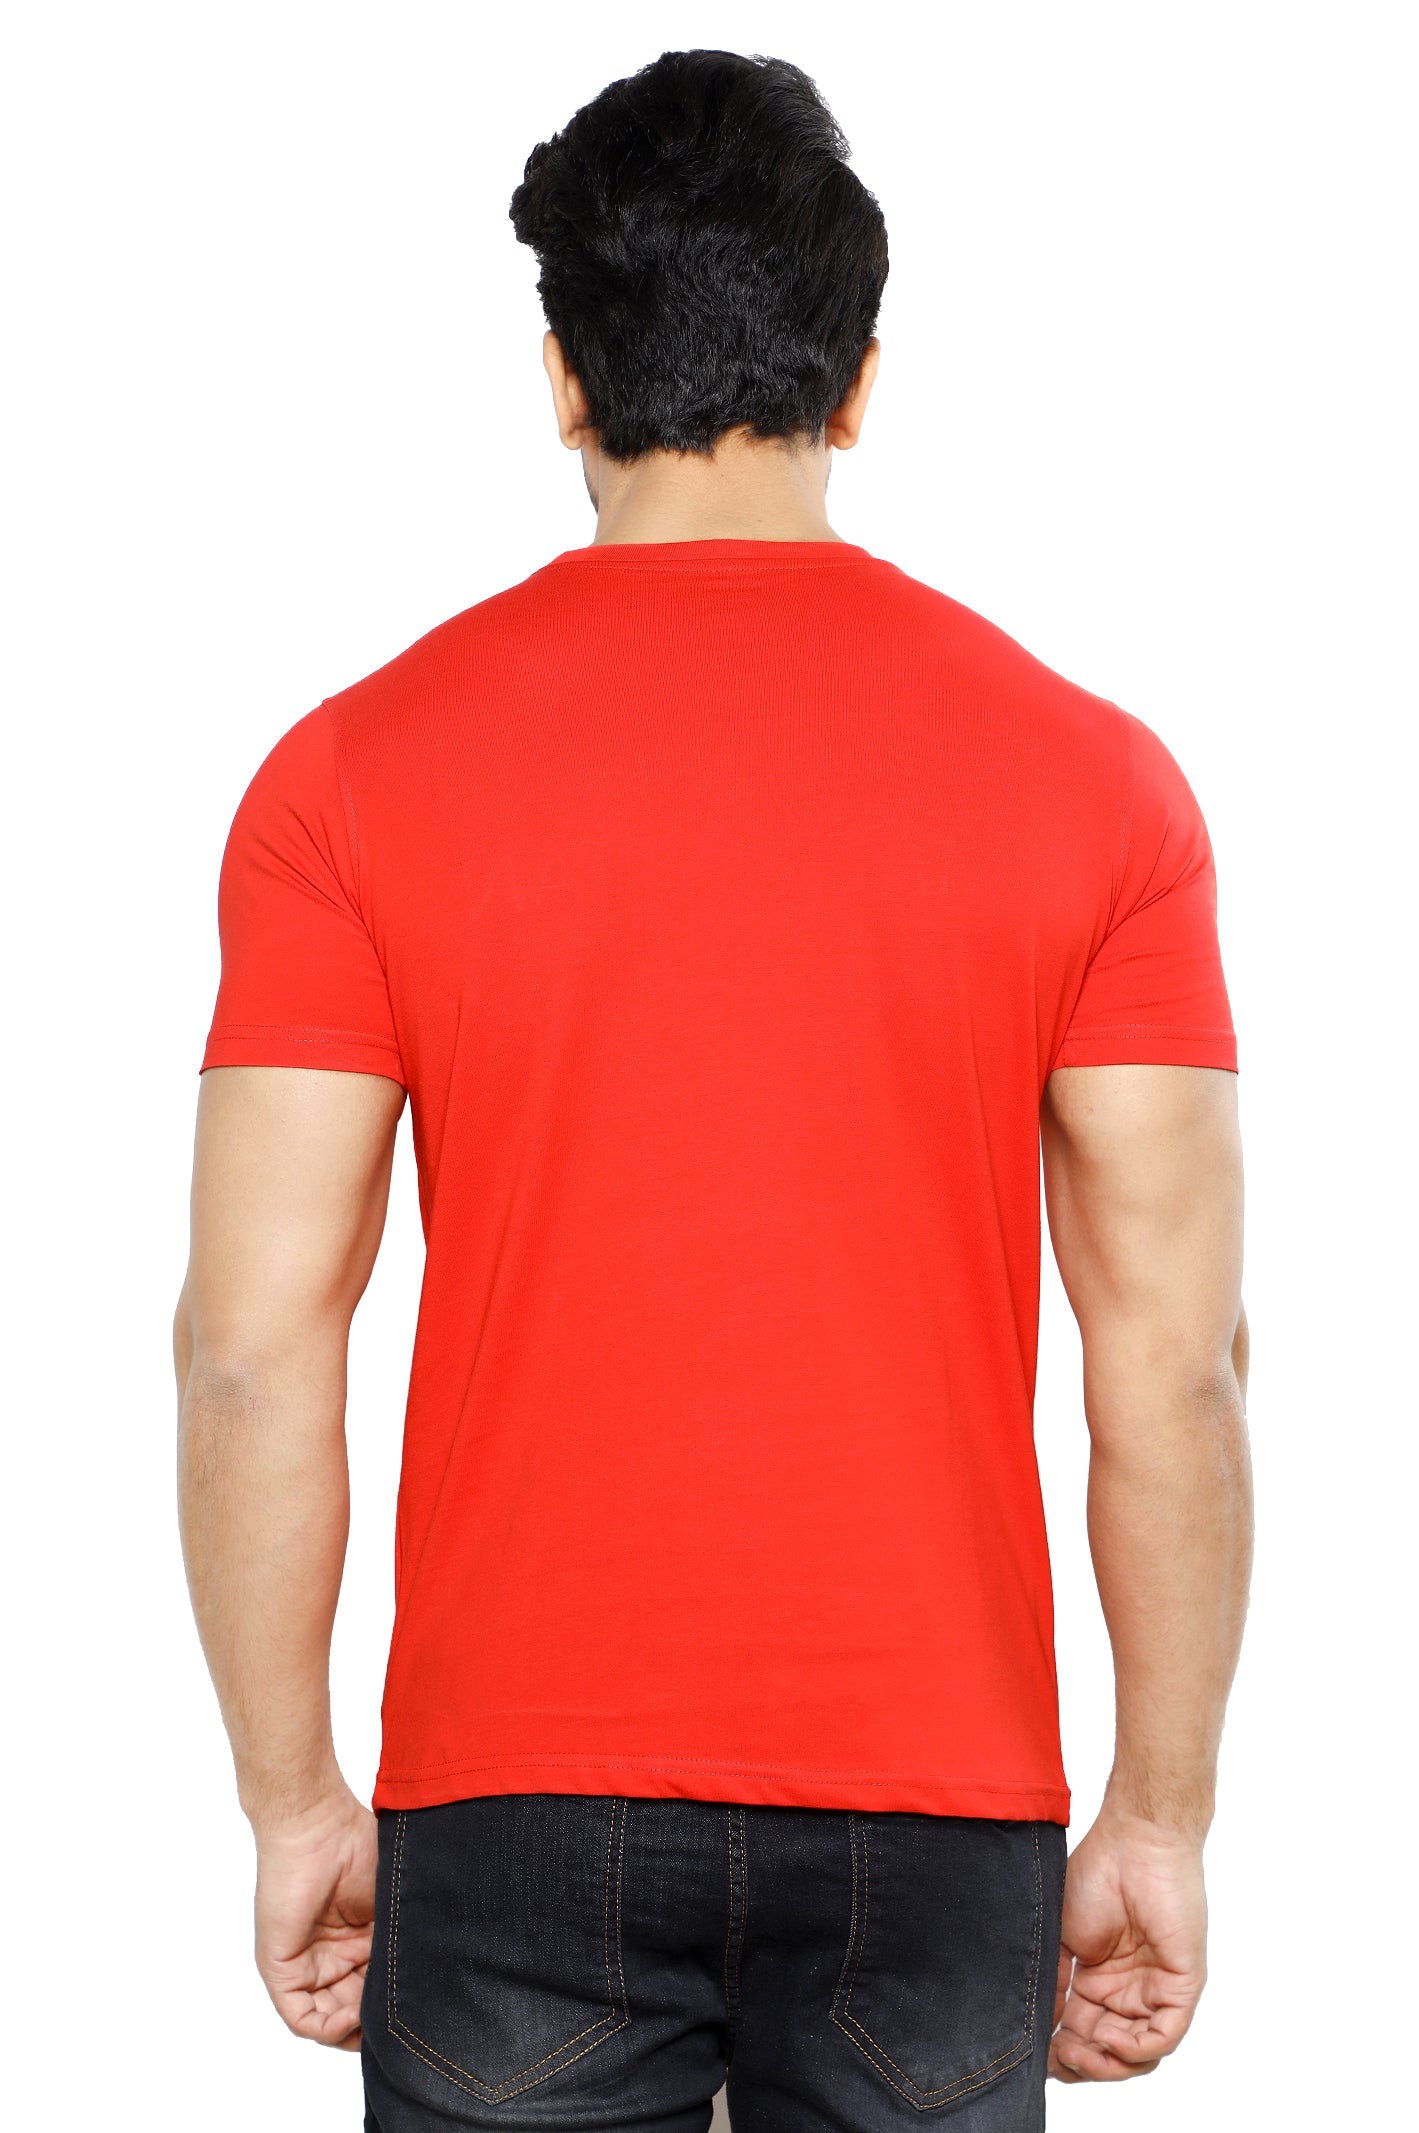 Diners Men's Round Neck T-Shirt SKU: NA803-RED - Diners